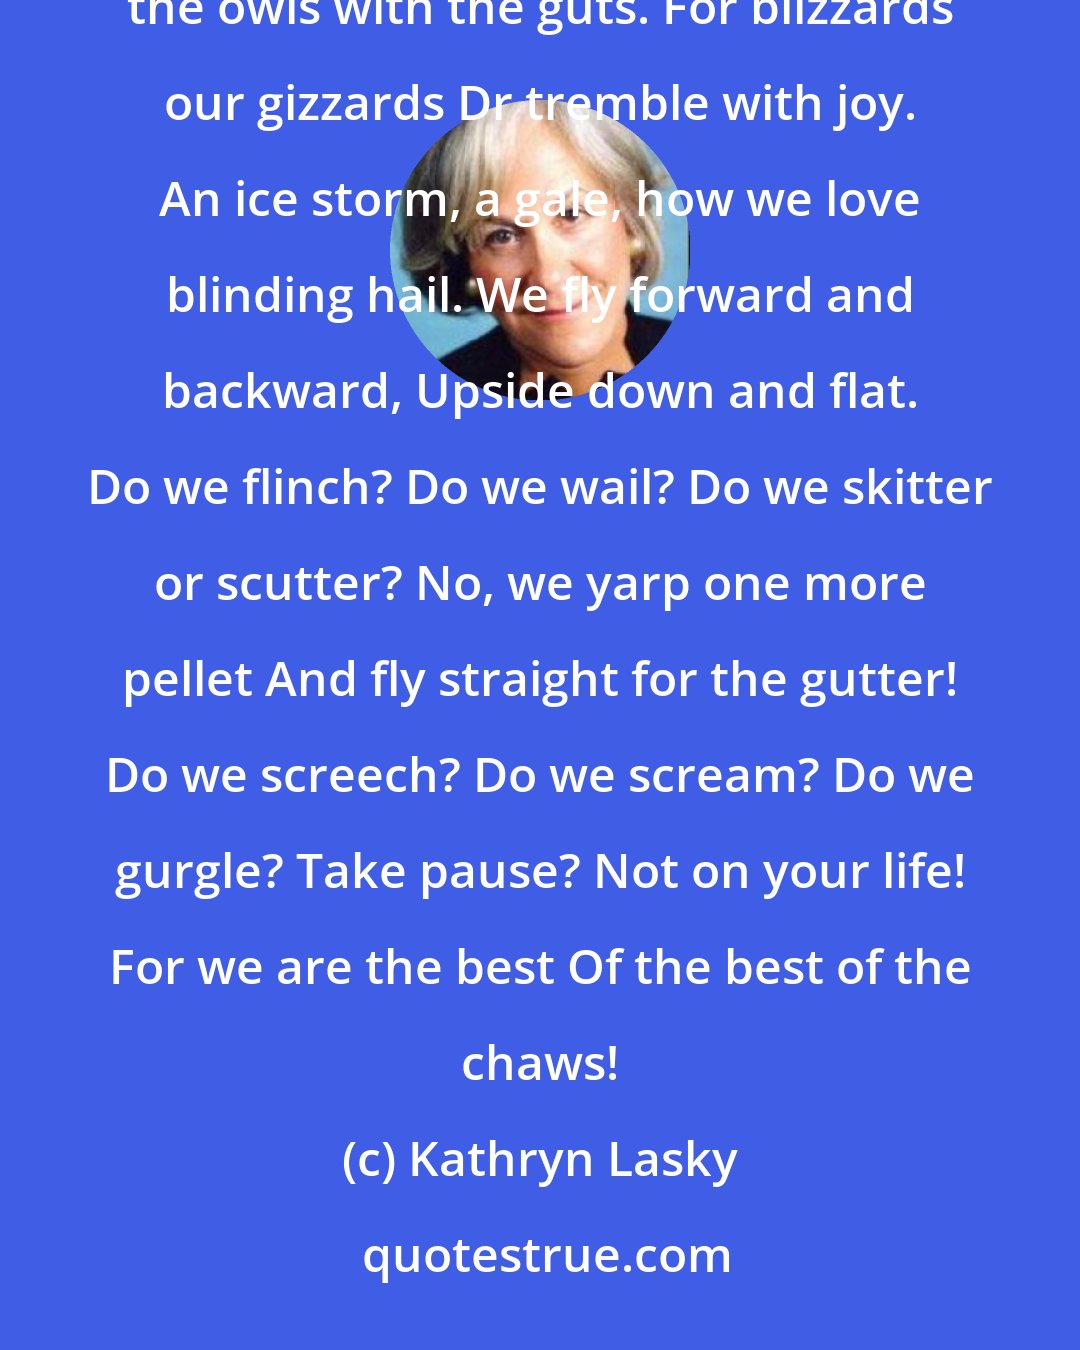 Kathryn Lasky: We are the owls of the weather chaw. We take it blistering, We take it all. Roiling boiling gusts, We're the owls with the guts. For blizzards our gizzards Dr tremble with joy. An ice storm, a gale, how we love blinding hail. We fly forward and backward, Upside down and flat. Do we flinch? Do we wail? Do we skitter or scutter? No, we yarp one more pellet And fly straight for the gutter! Do we screech? Do we scream? Do we gurgle? Take pause? Not on your life! For we are the best Of the best of the chaws!